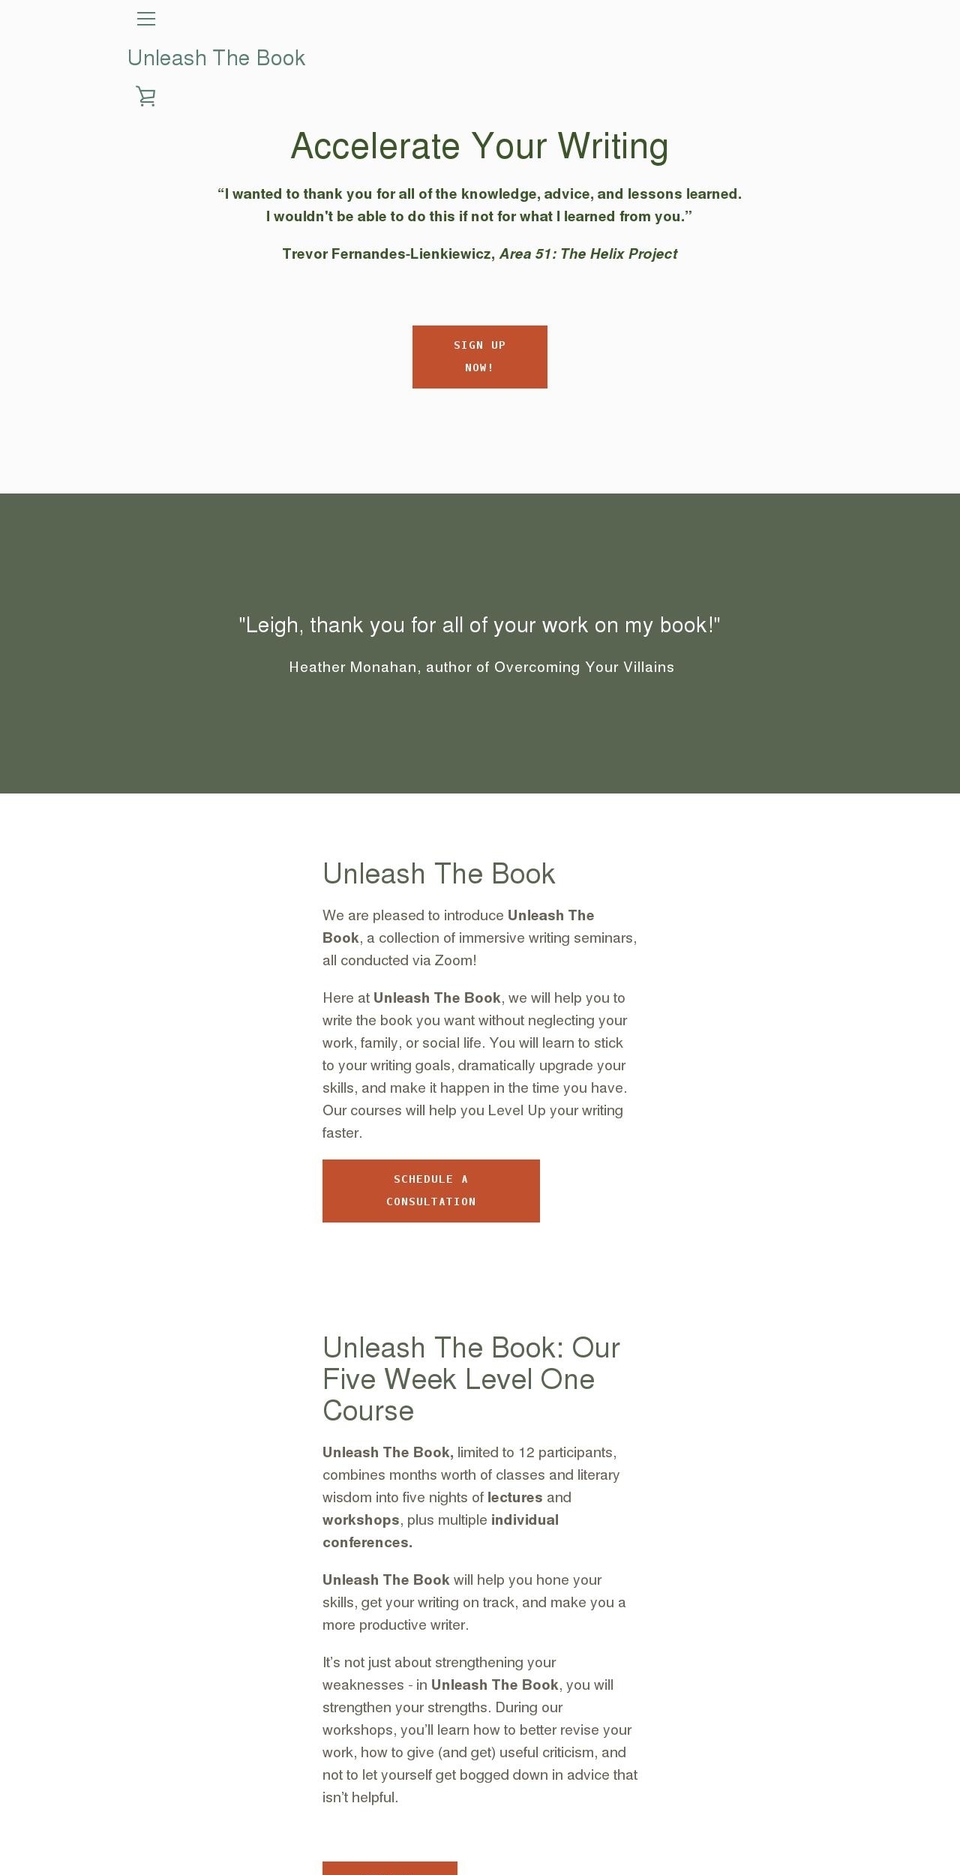 Narrative with Installments message Shopify theme site example unleashthebook.com